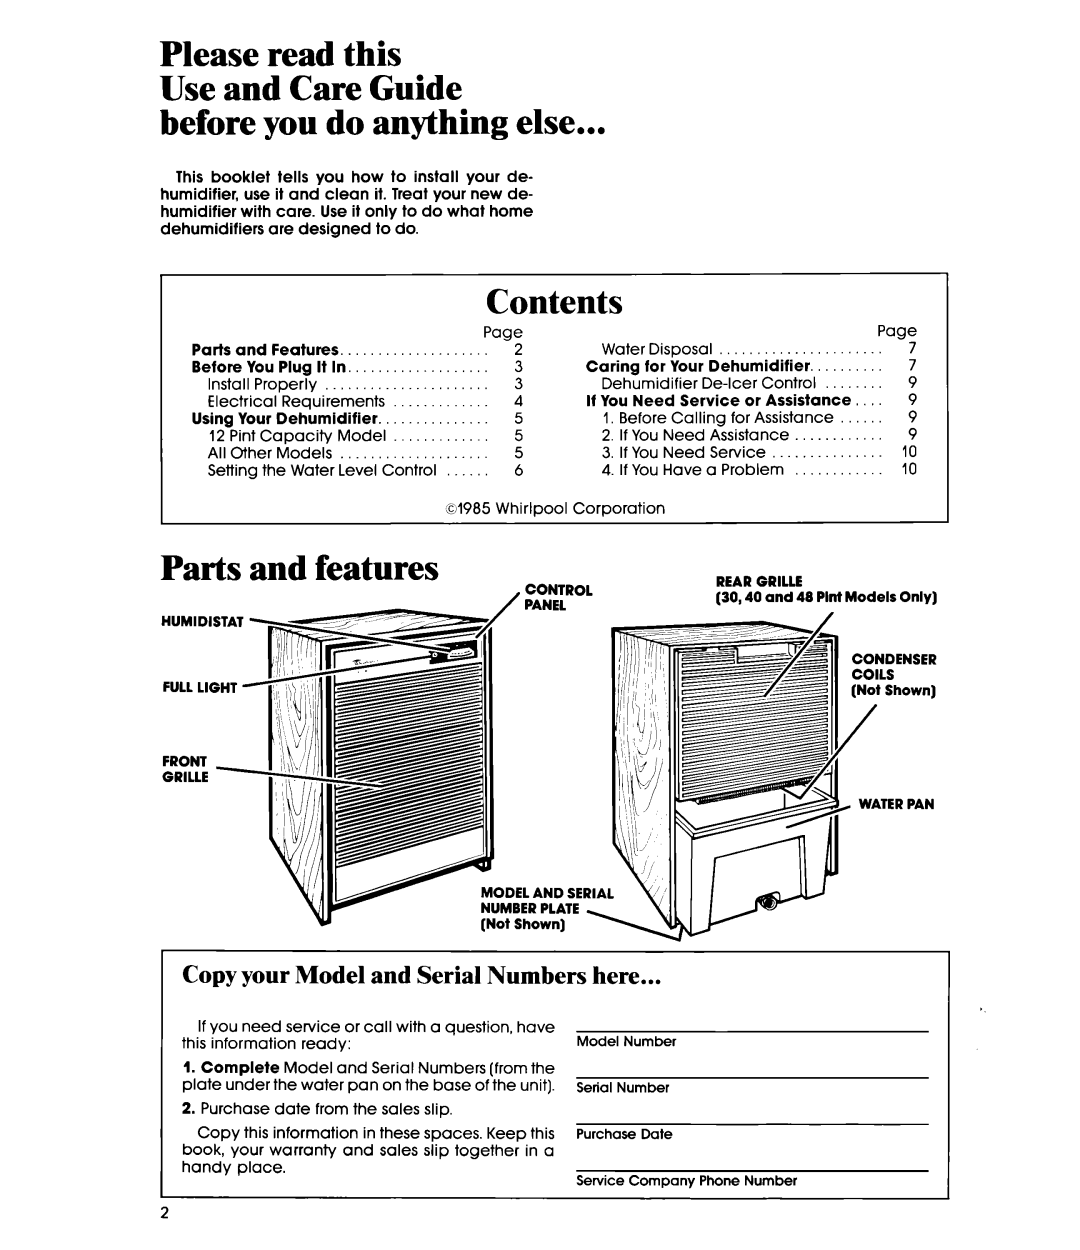 Whirlpool AD0402XM0 manual before you do anything else, Contents, Parts and features, Please read this Use and Care Guide 